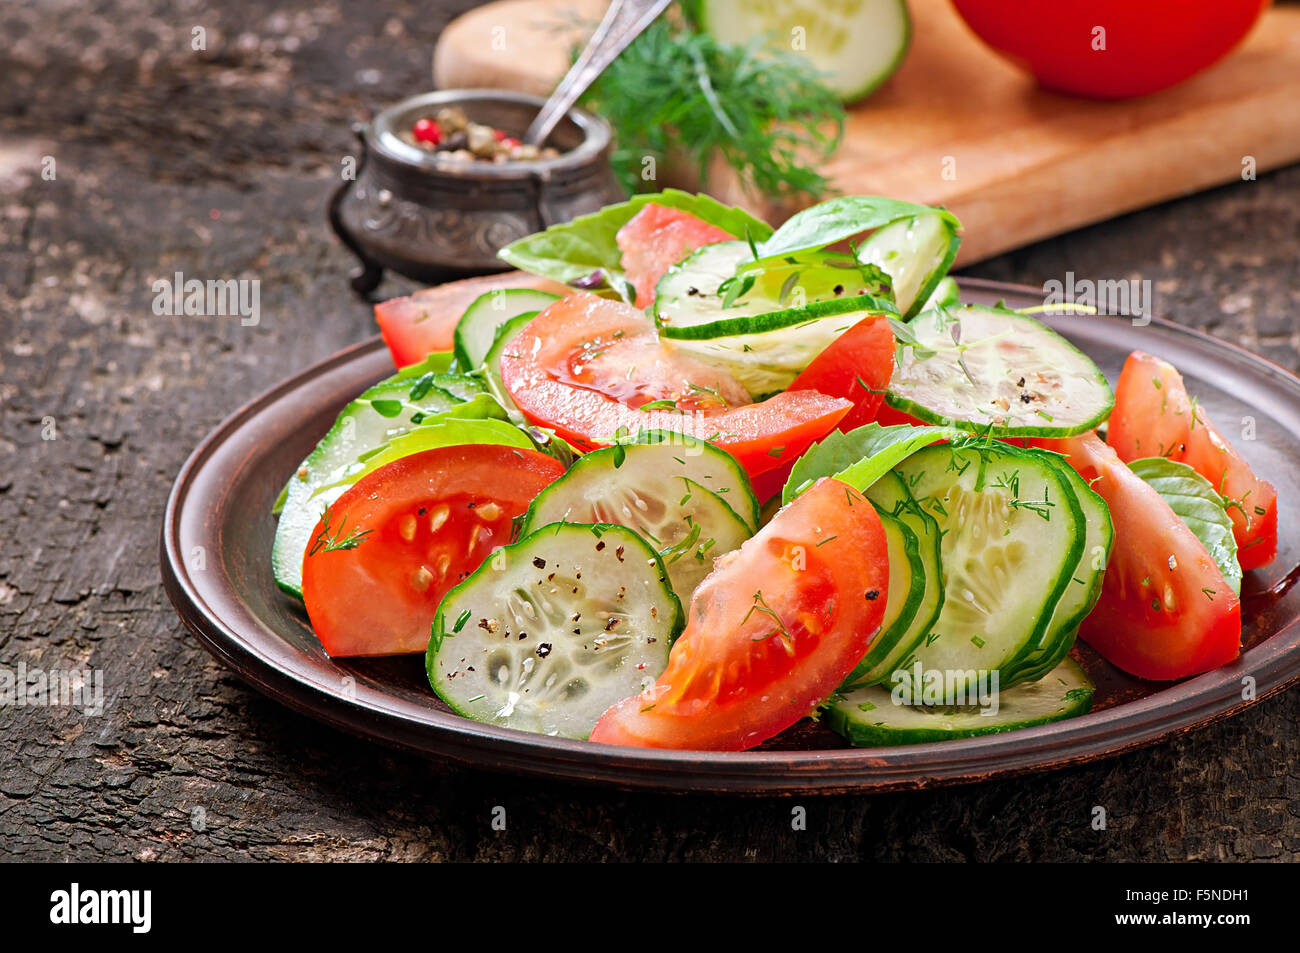 Tomato and cucumber salad with black pepper and basil Stock Photo